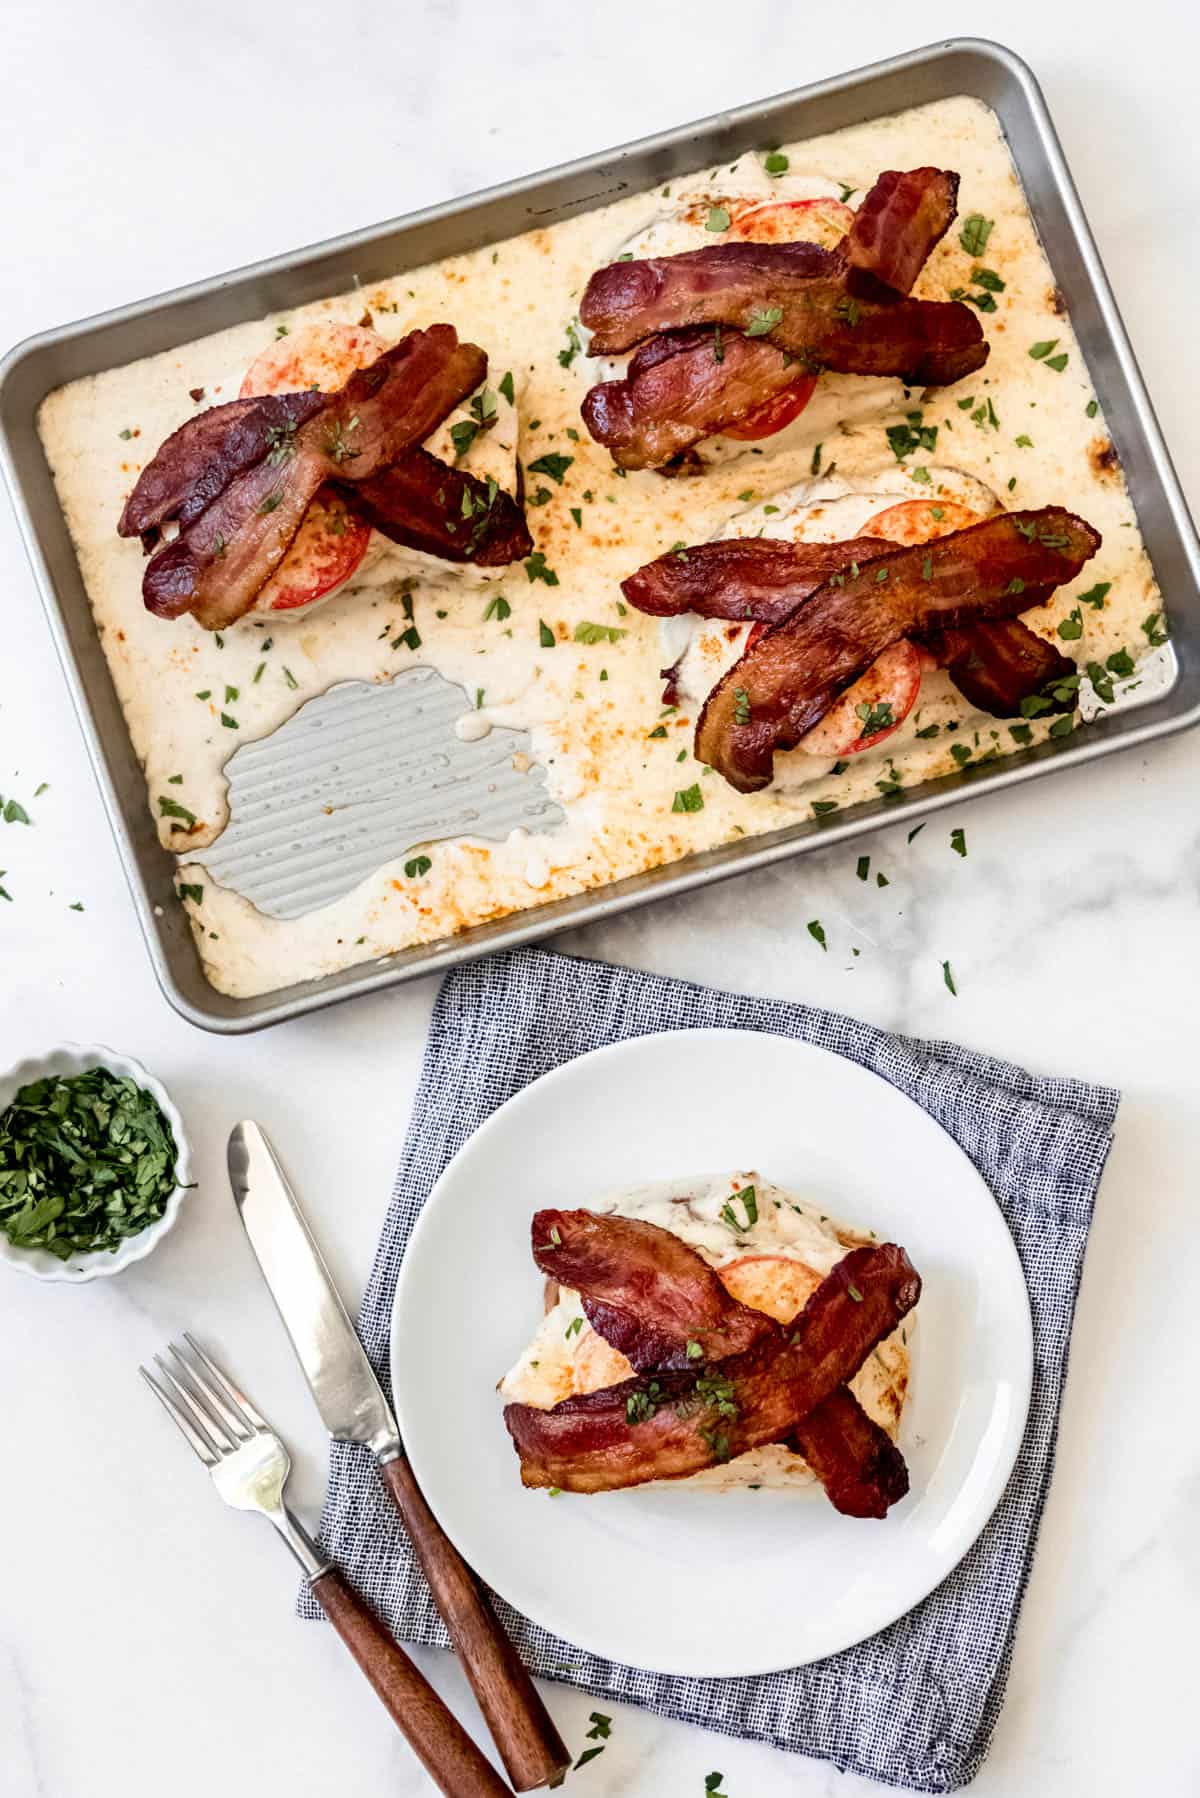 Overhead view of Kentucky hot brown sandwiches on sheet pan and plate.